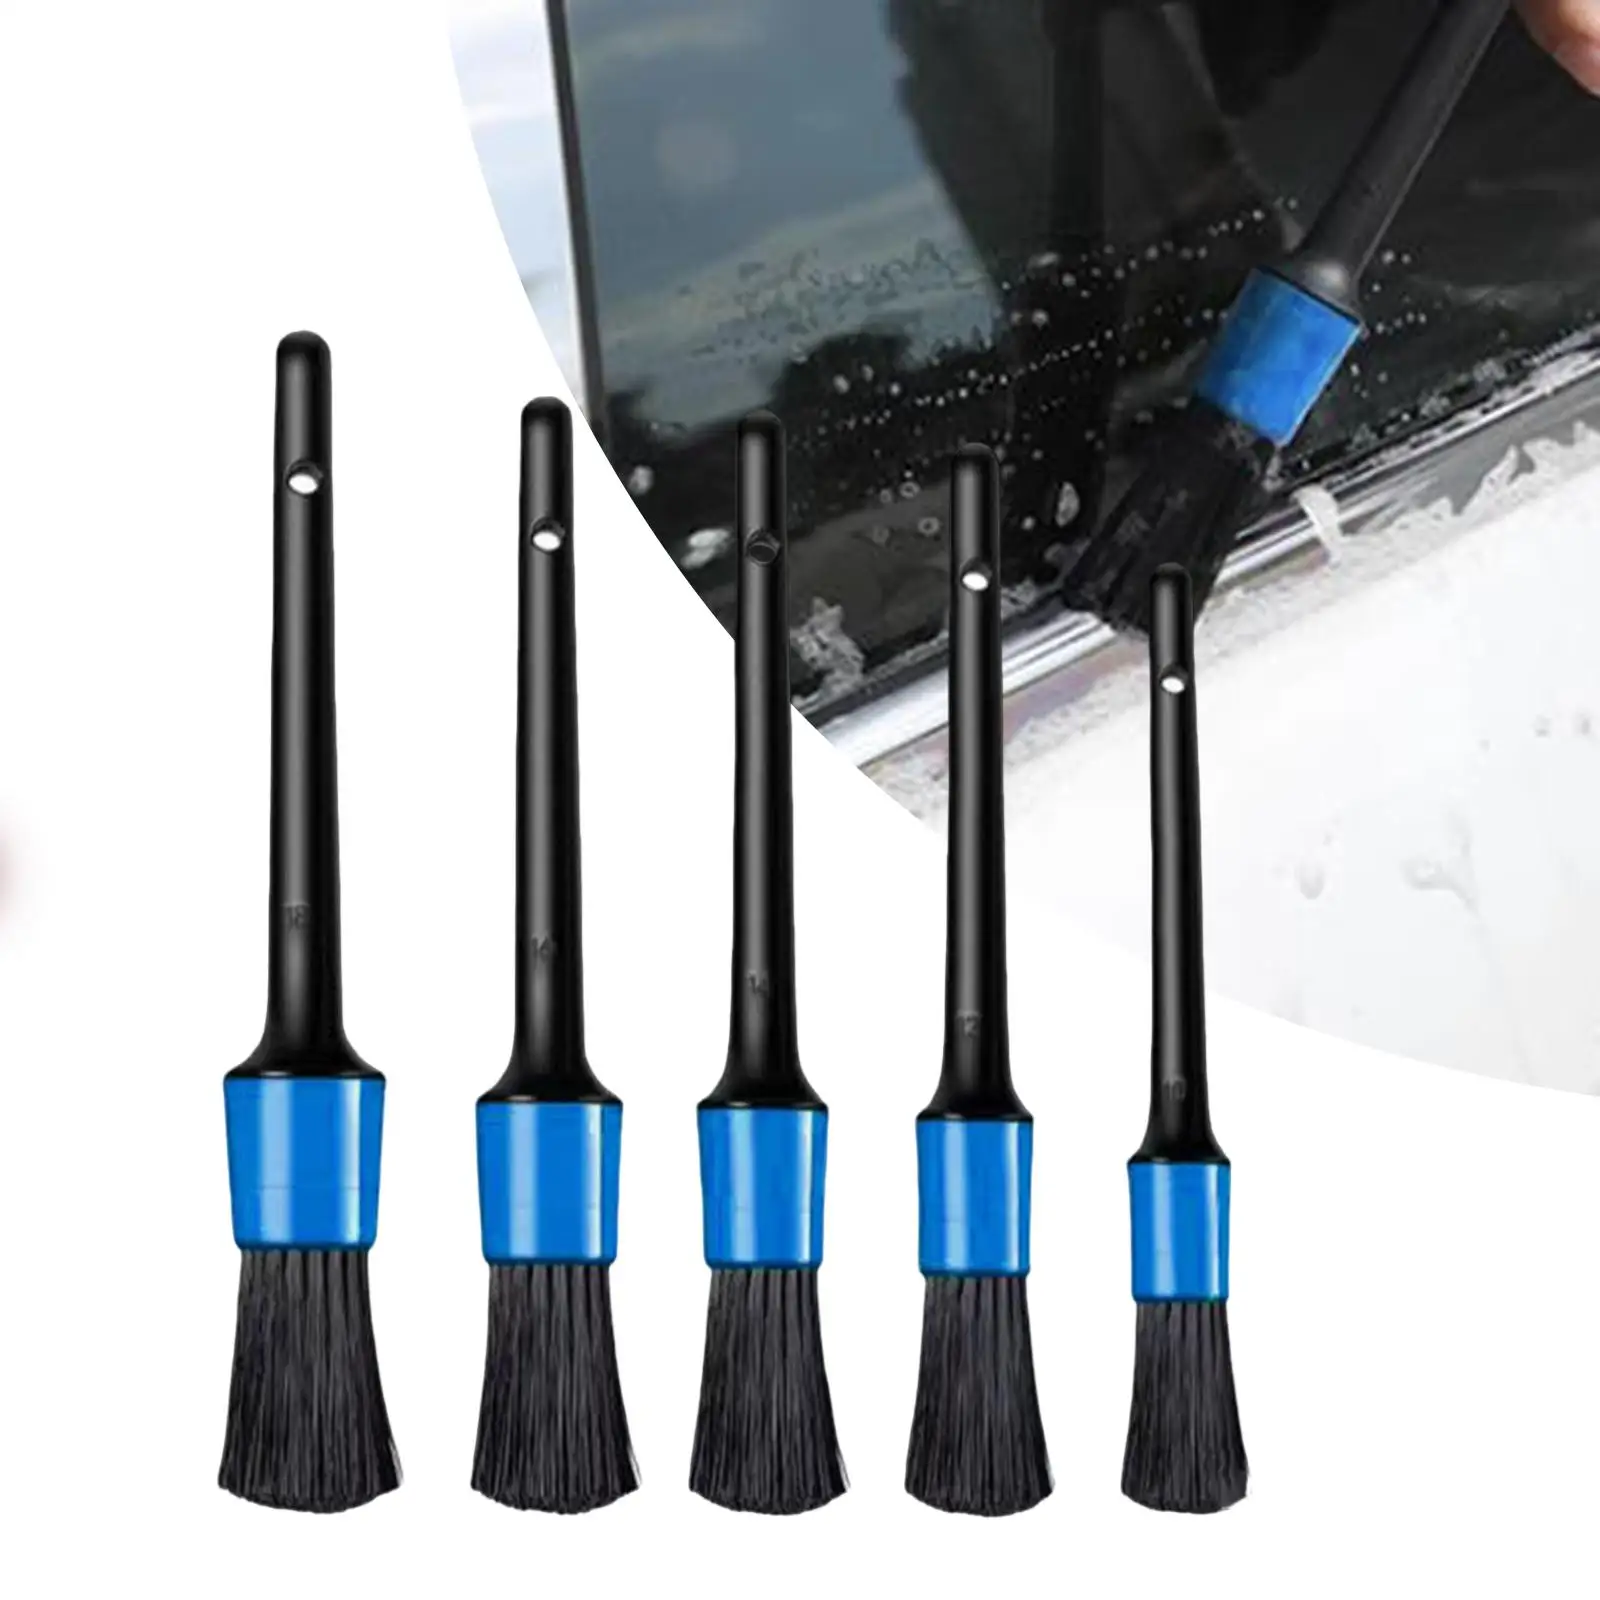 Car Detail Brush Set 5 Sizes Accessories Dry and Wet Use Multifunctional